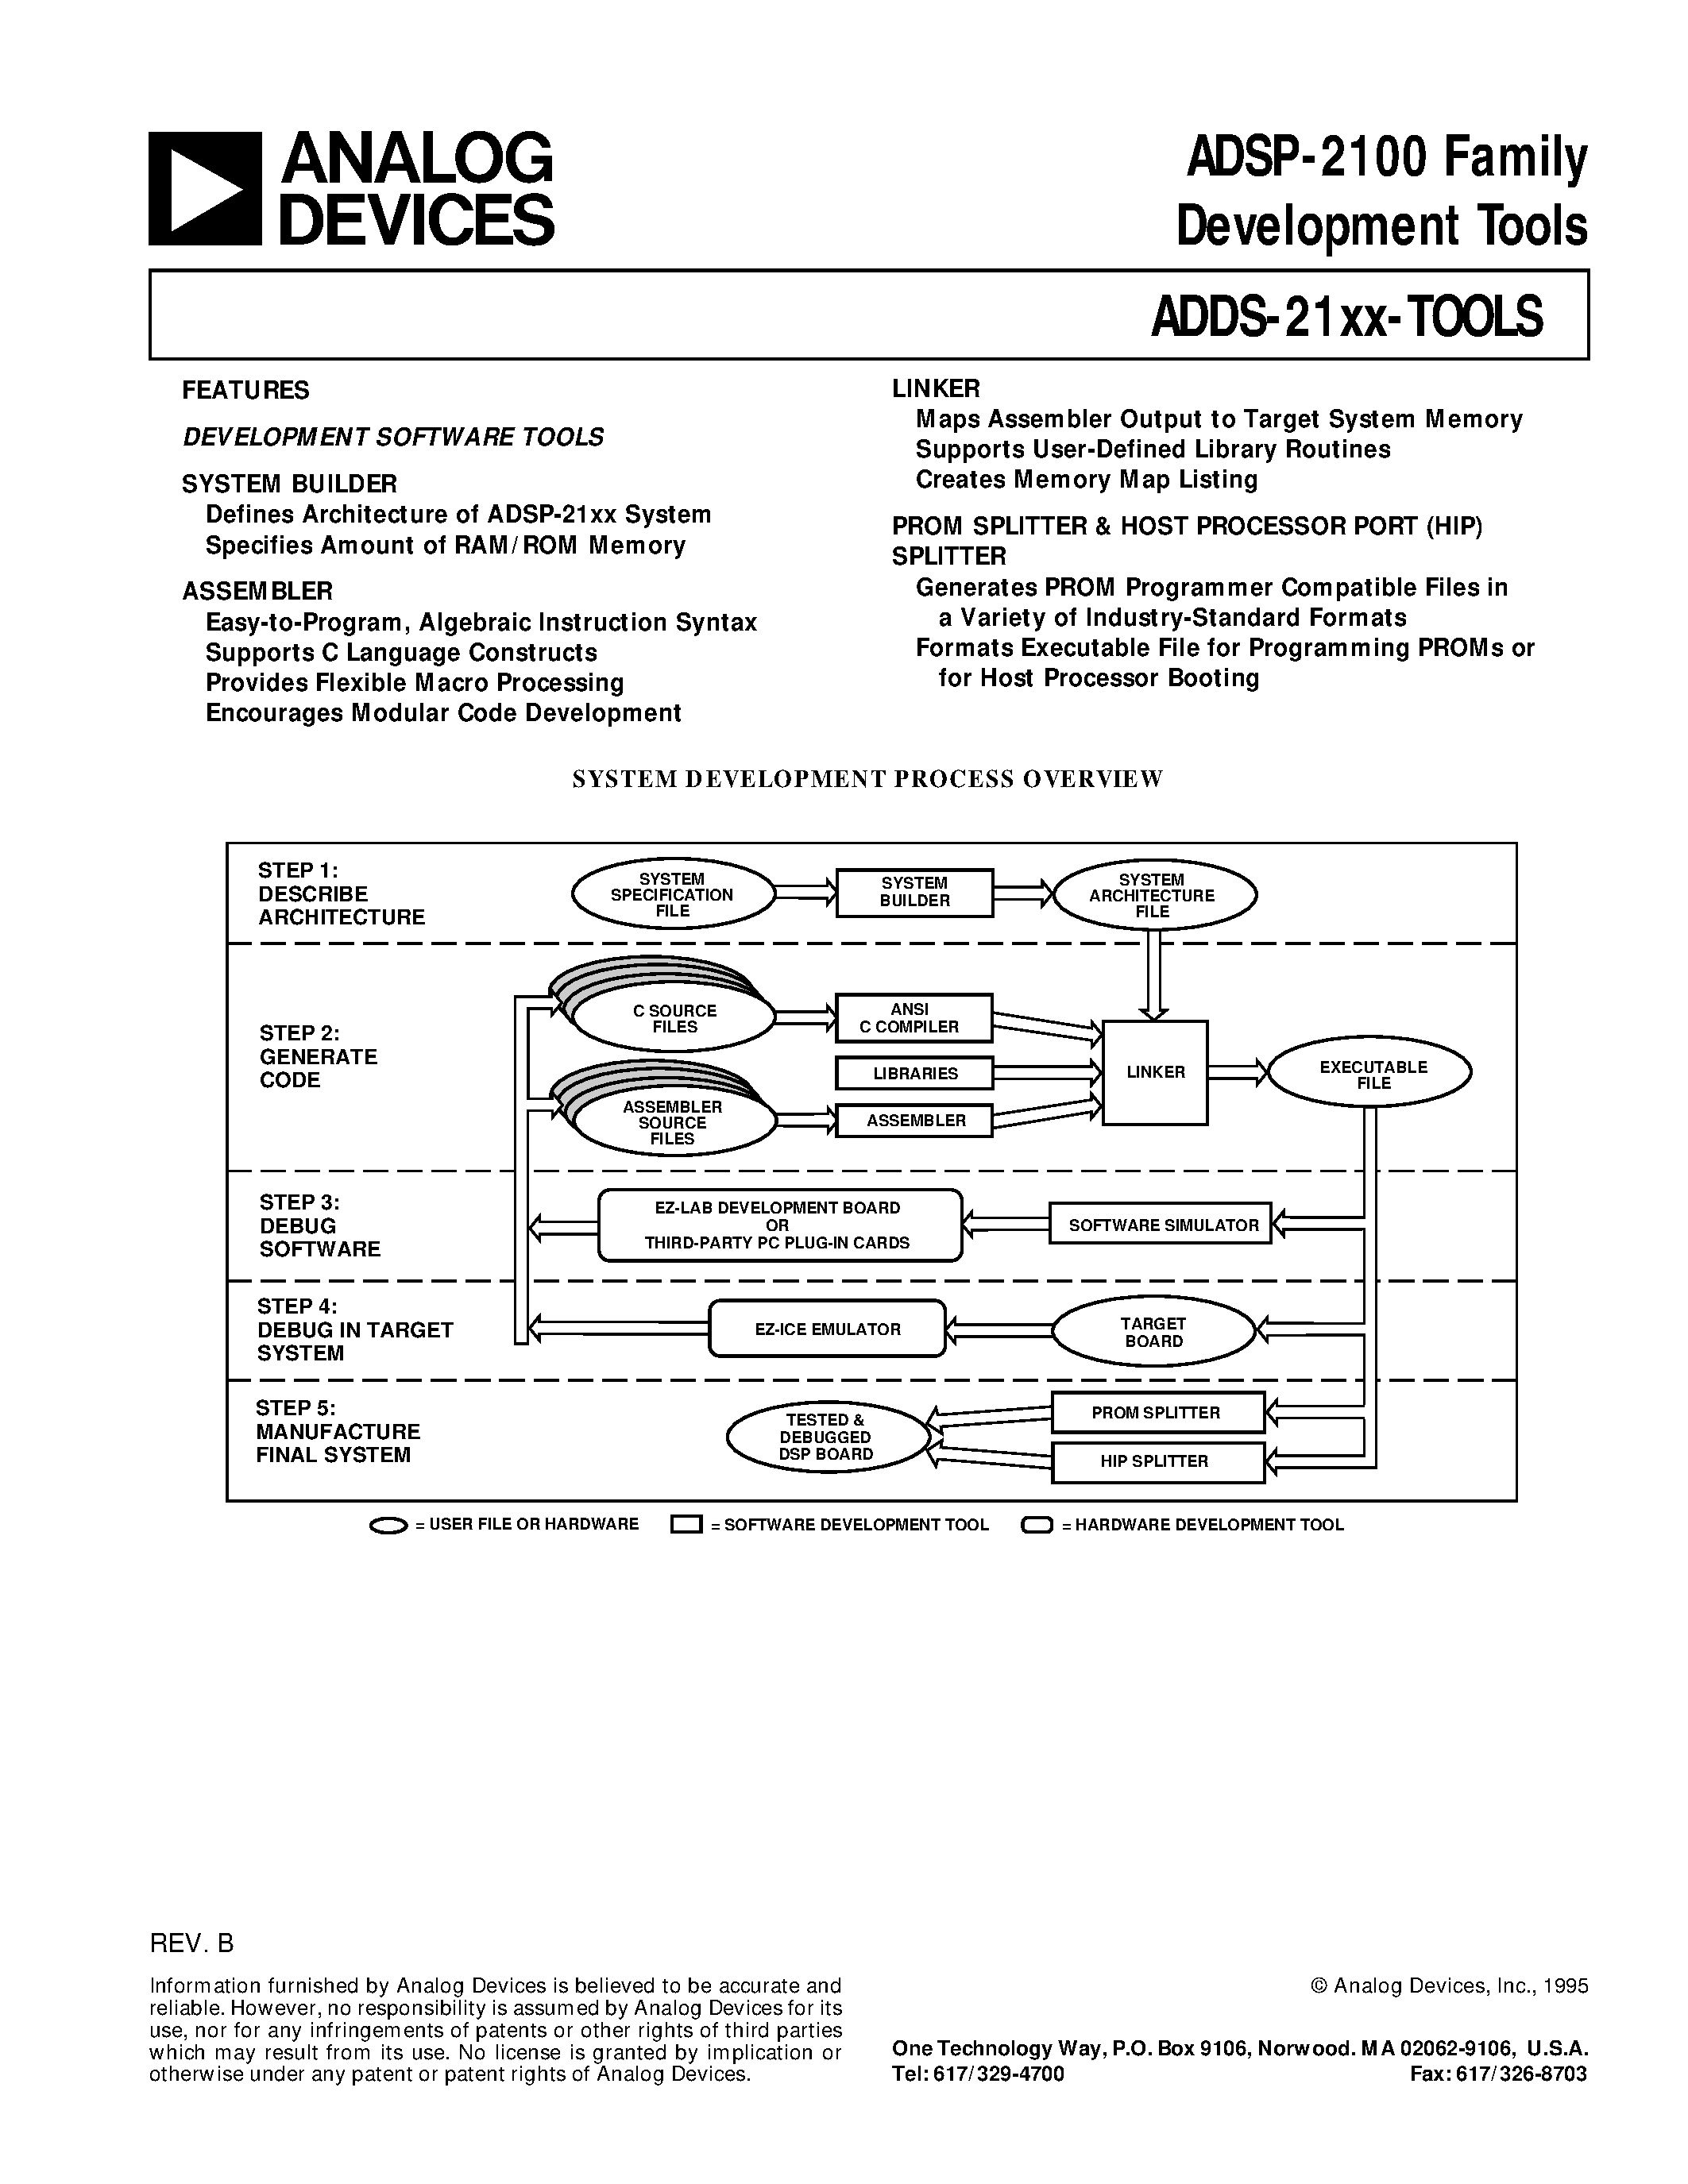 Datasheet ADDS-21XX-SW-PC - ADSP-2100 Family Development Tools page 1